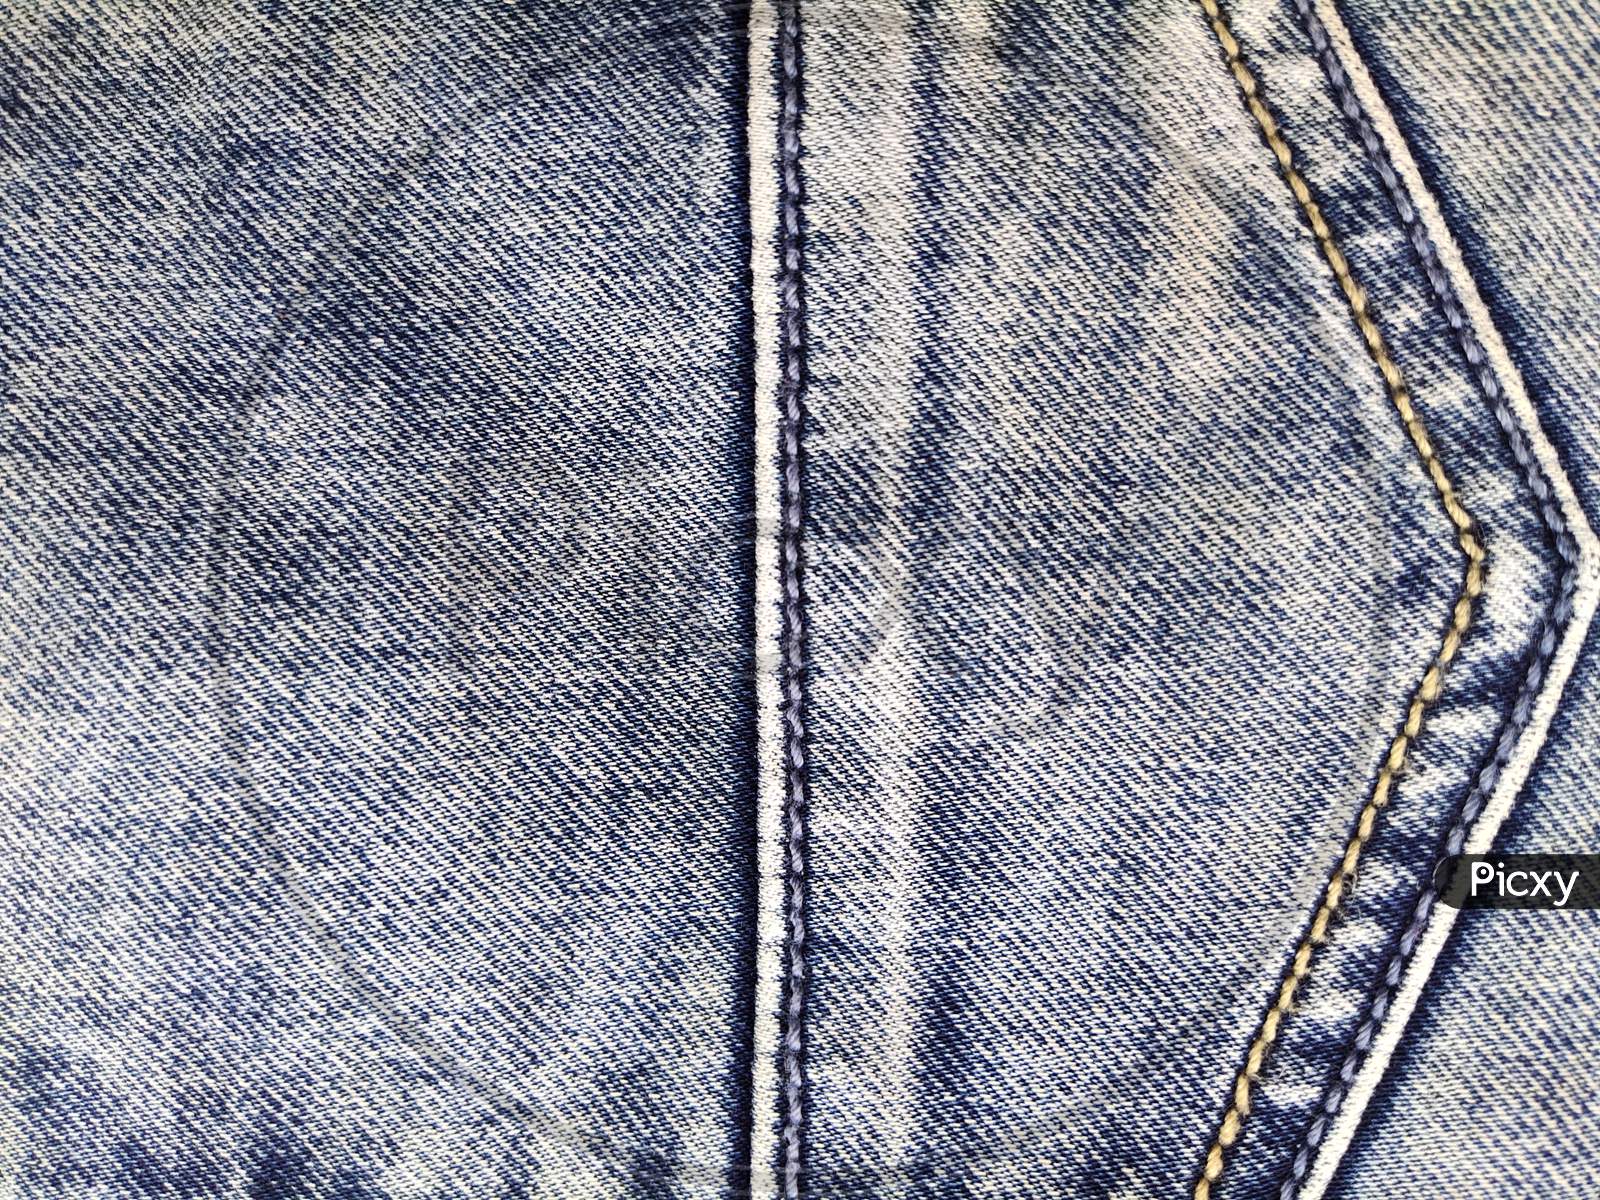 Photo with denim texture fabric. Jeans pocket texture, denim background, old style jeans pocket background